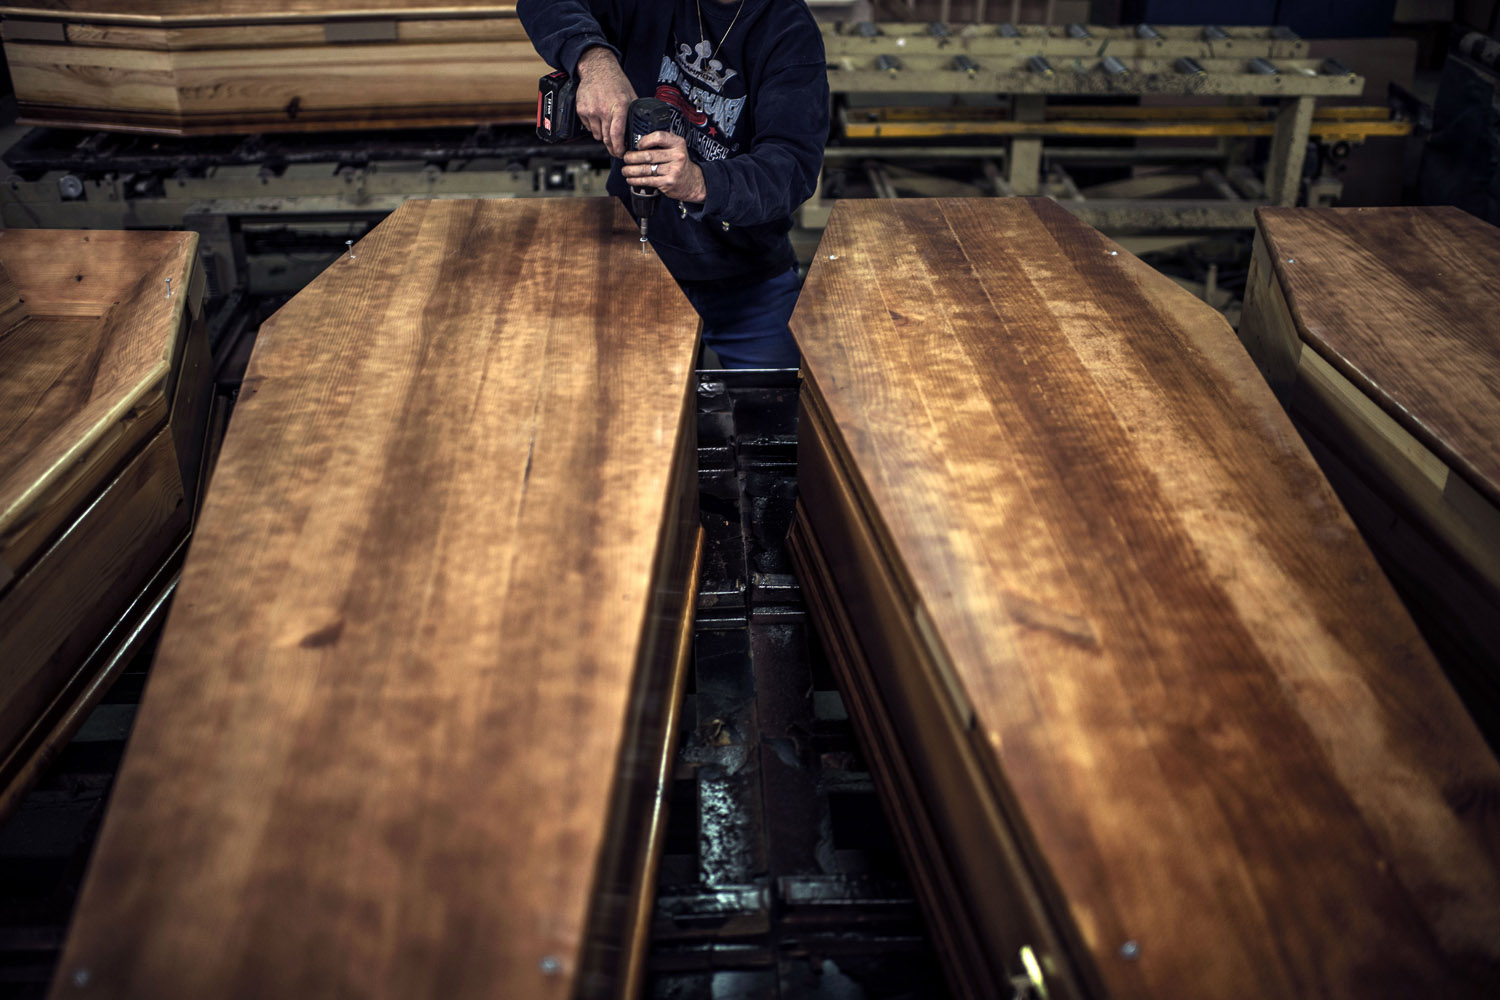 Image: Oct. 29, 2012. An employee of the OGF company works on a wooden coffin on in Reyrieux, France.